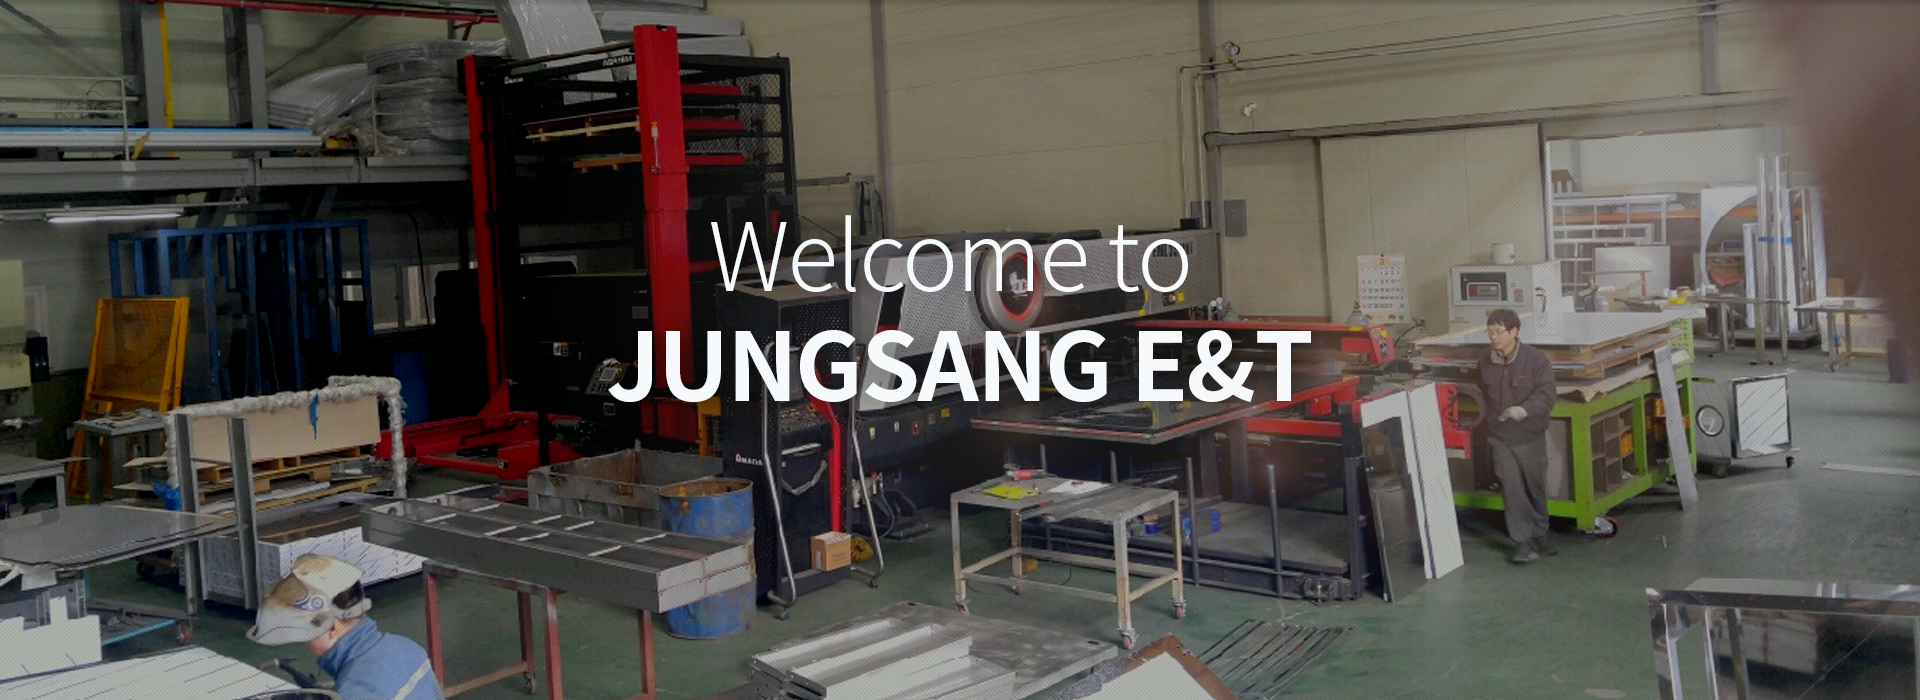 welcome to jungsang e and t